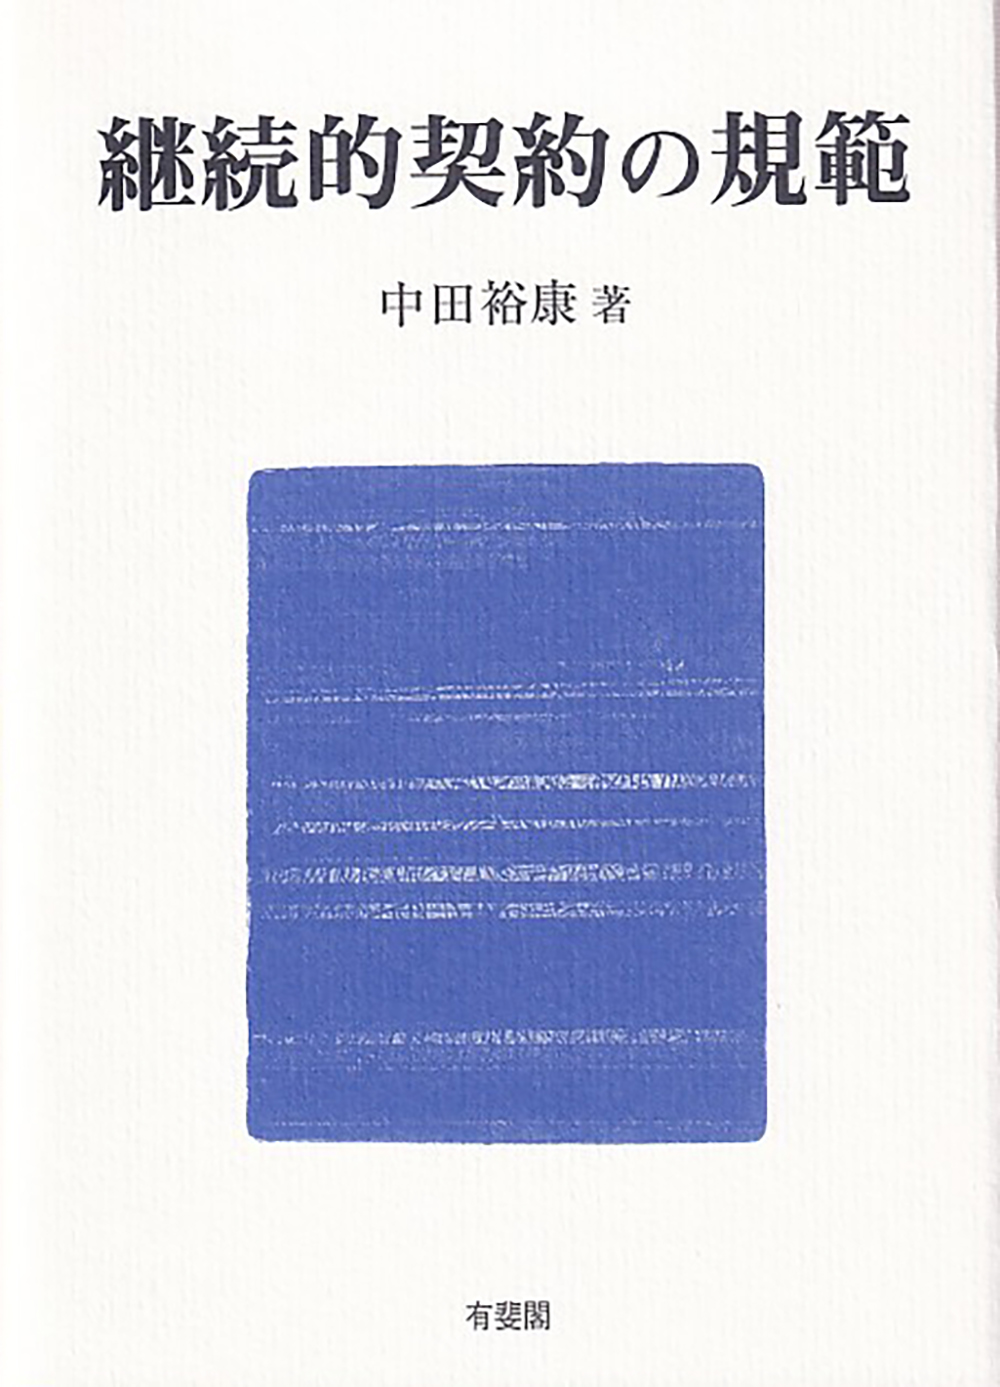 A white cover with blue element